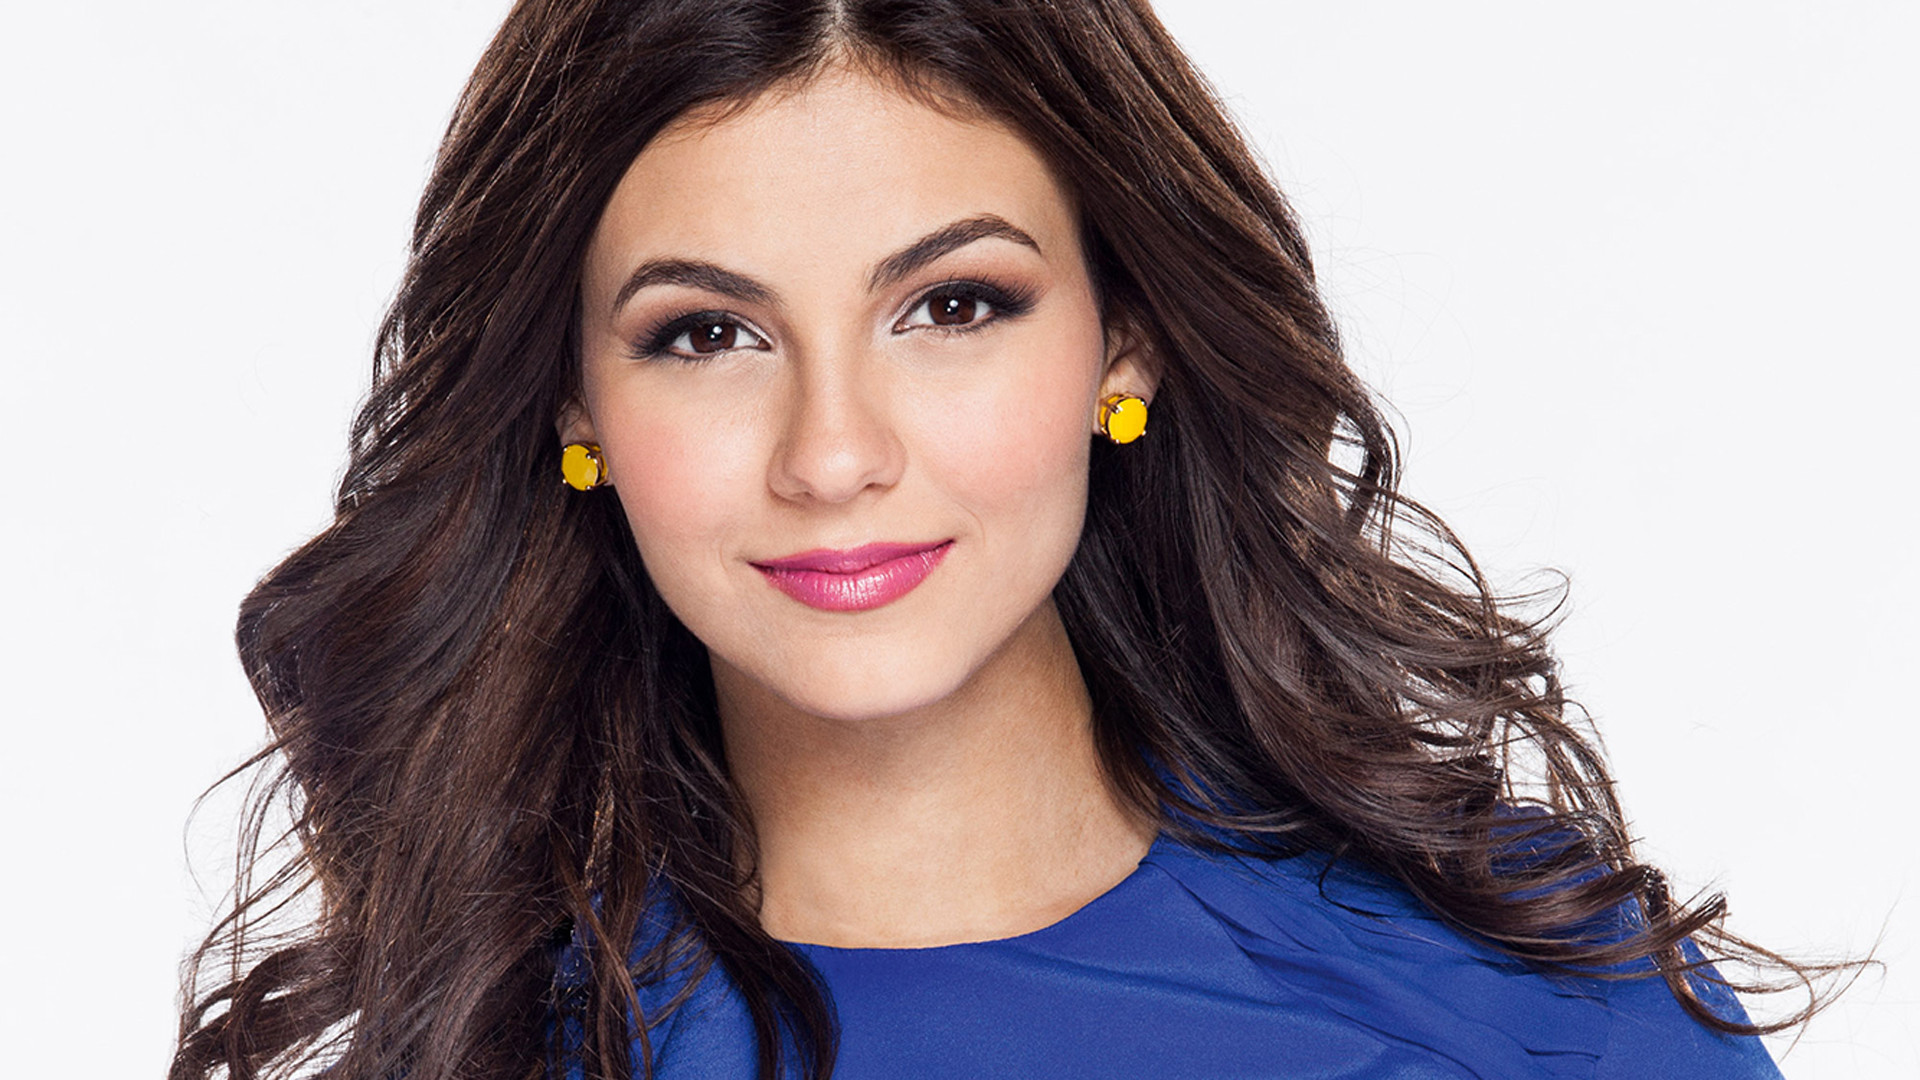 1920x1080 HD Victoria Justice Wallpapers 31 HD Victoria Justice Wallpapers 32